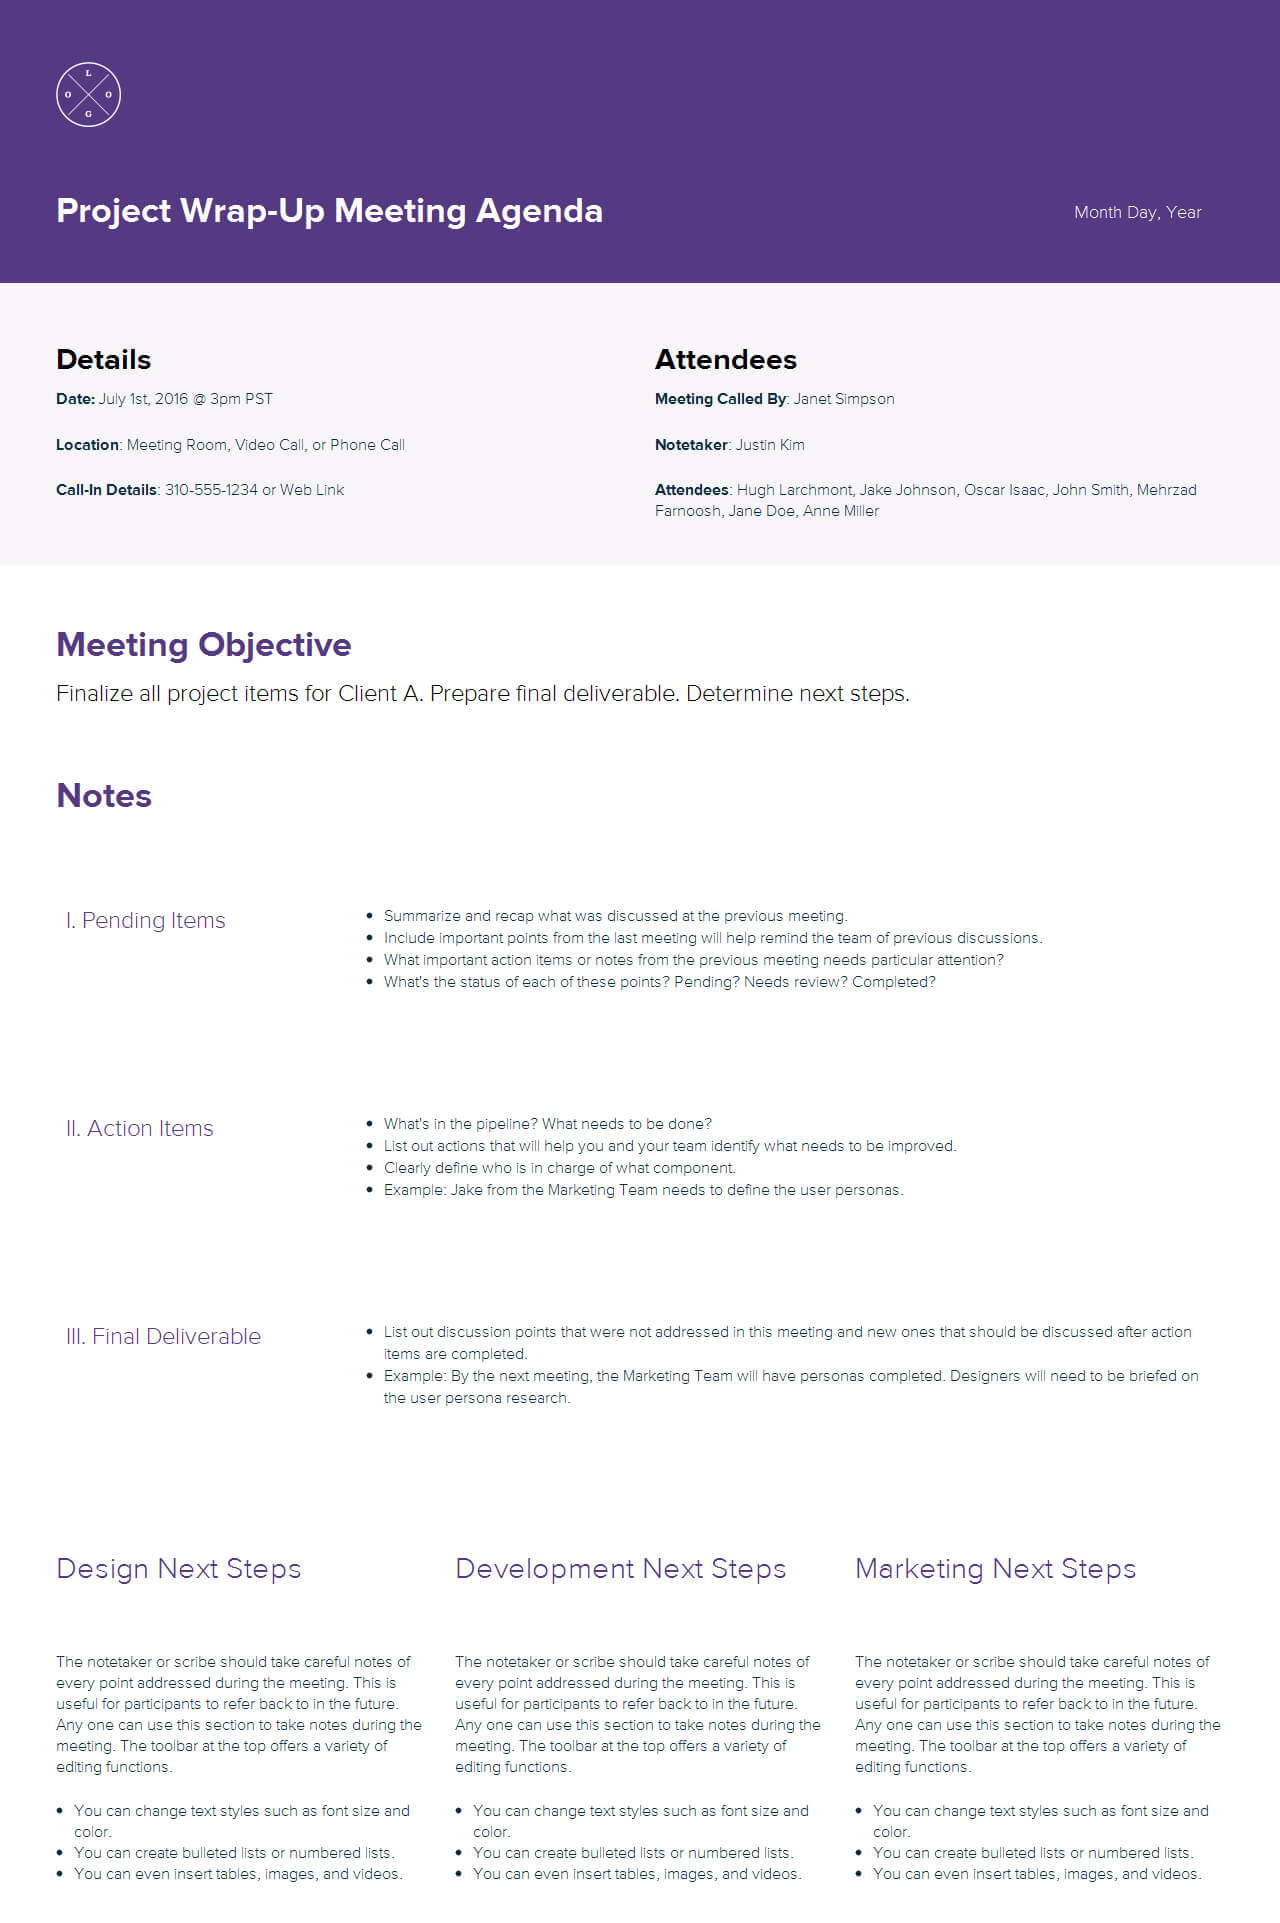 How To Create A Meeting Agenda: A Step By Step Guide For With Regard To Wrap Up Report Template